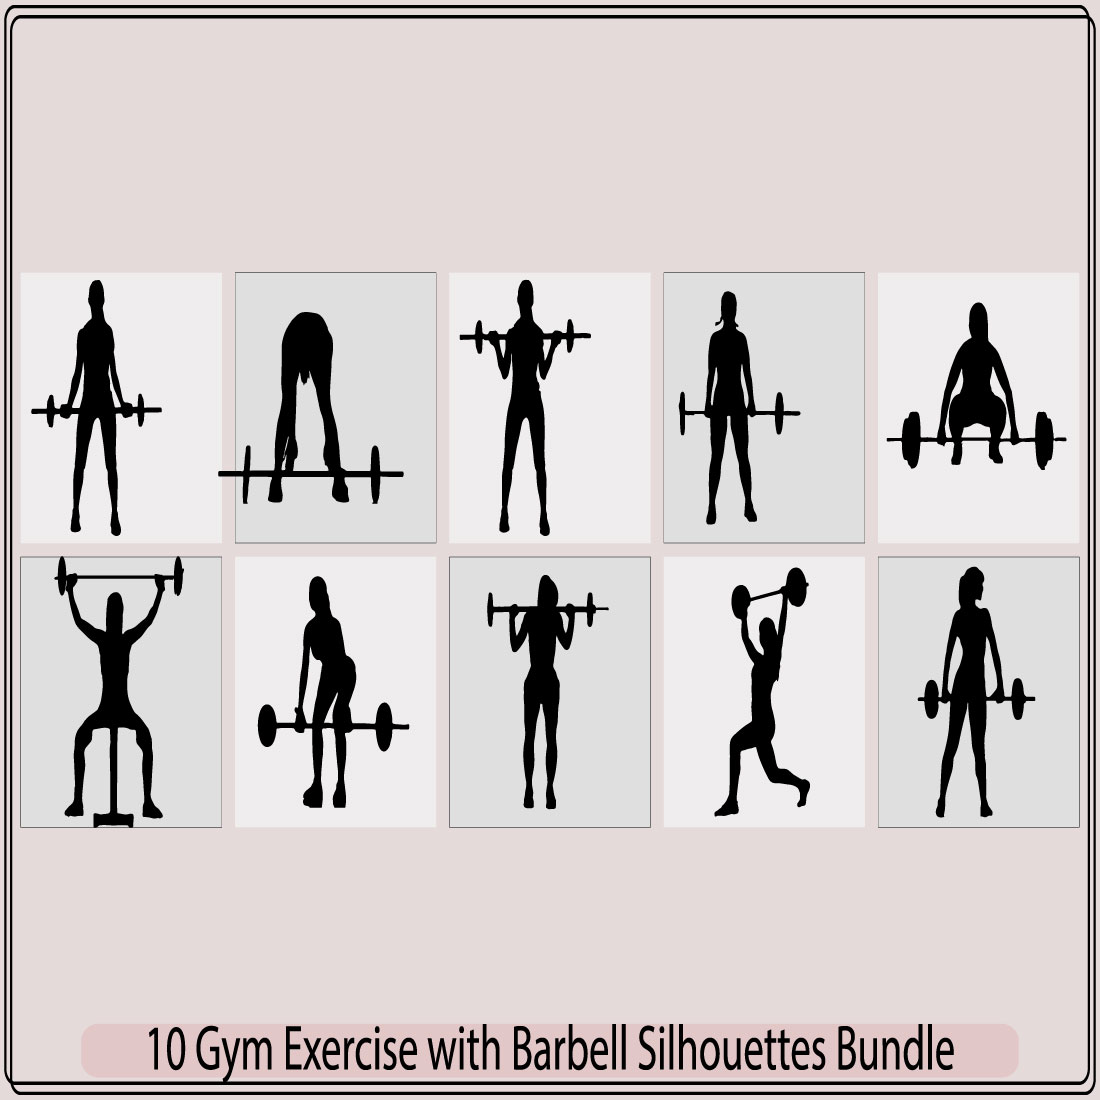 Weightlifter lifts big barbell,Squats with weight Woman lifts big barbell,Fitness Club emblem Training Woman with barbell cover image.